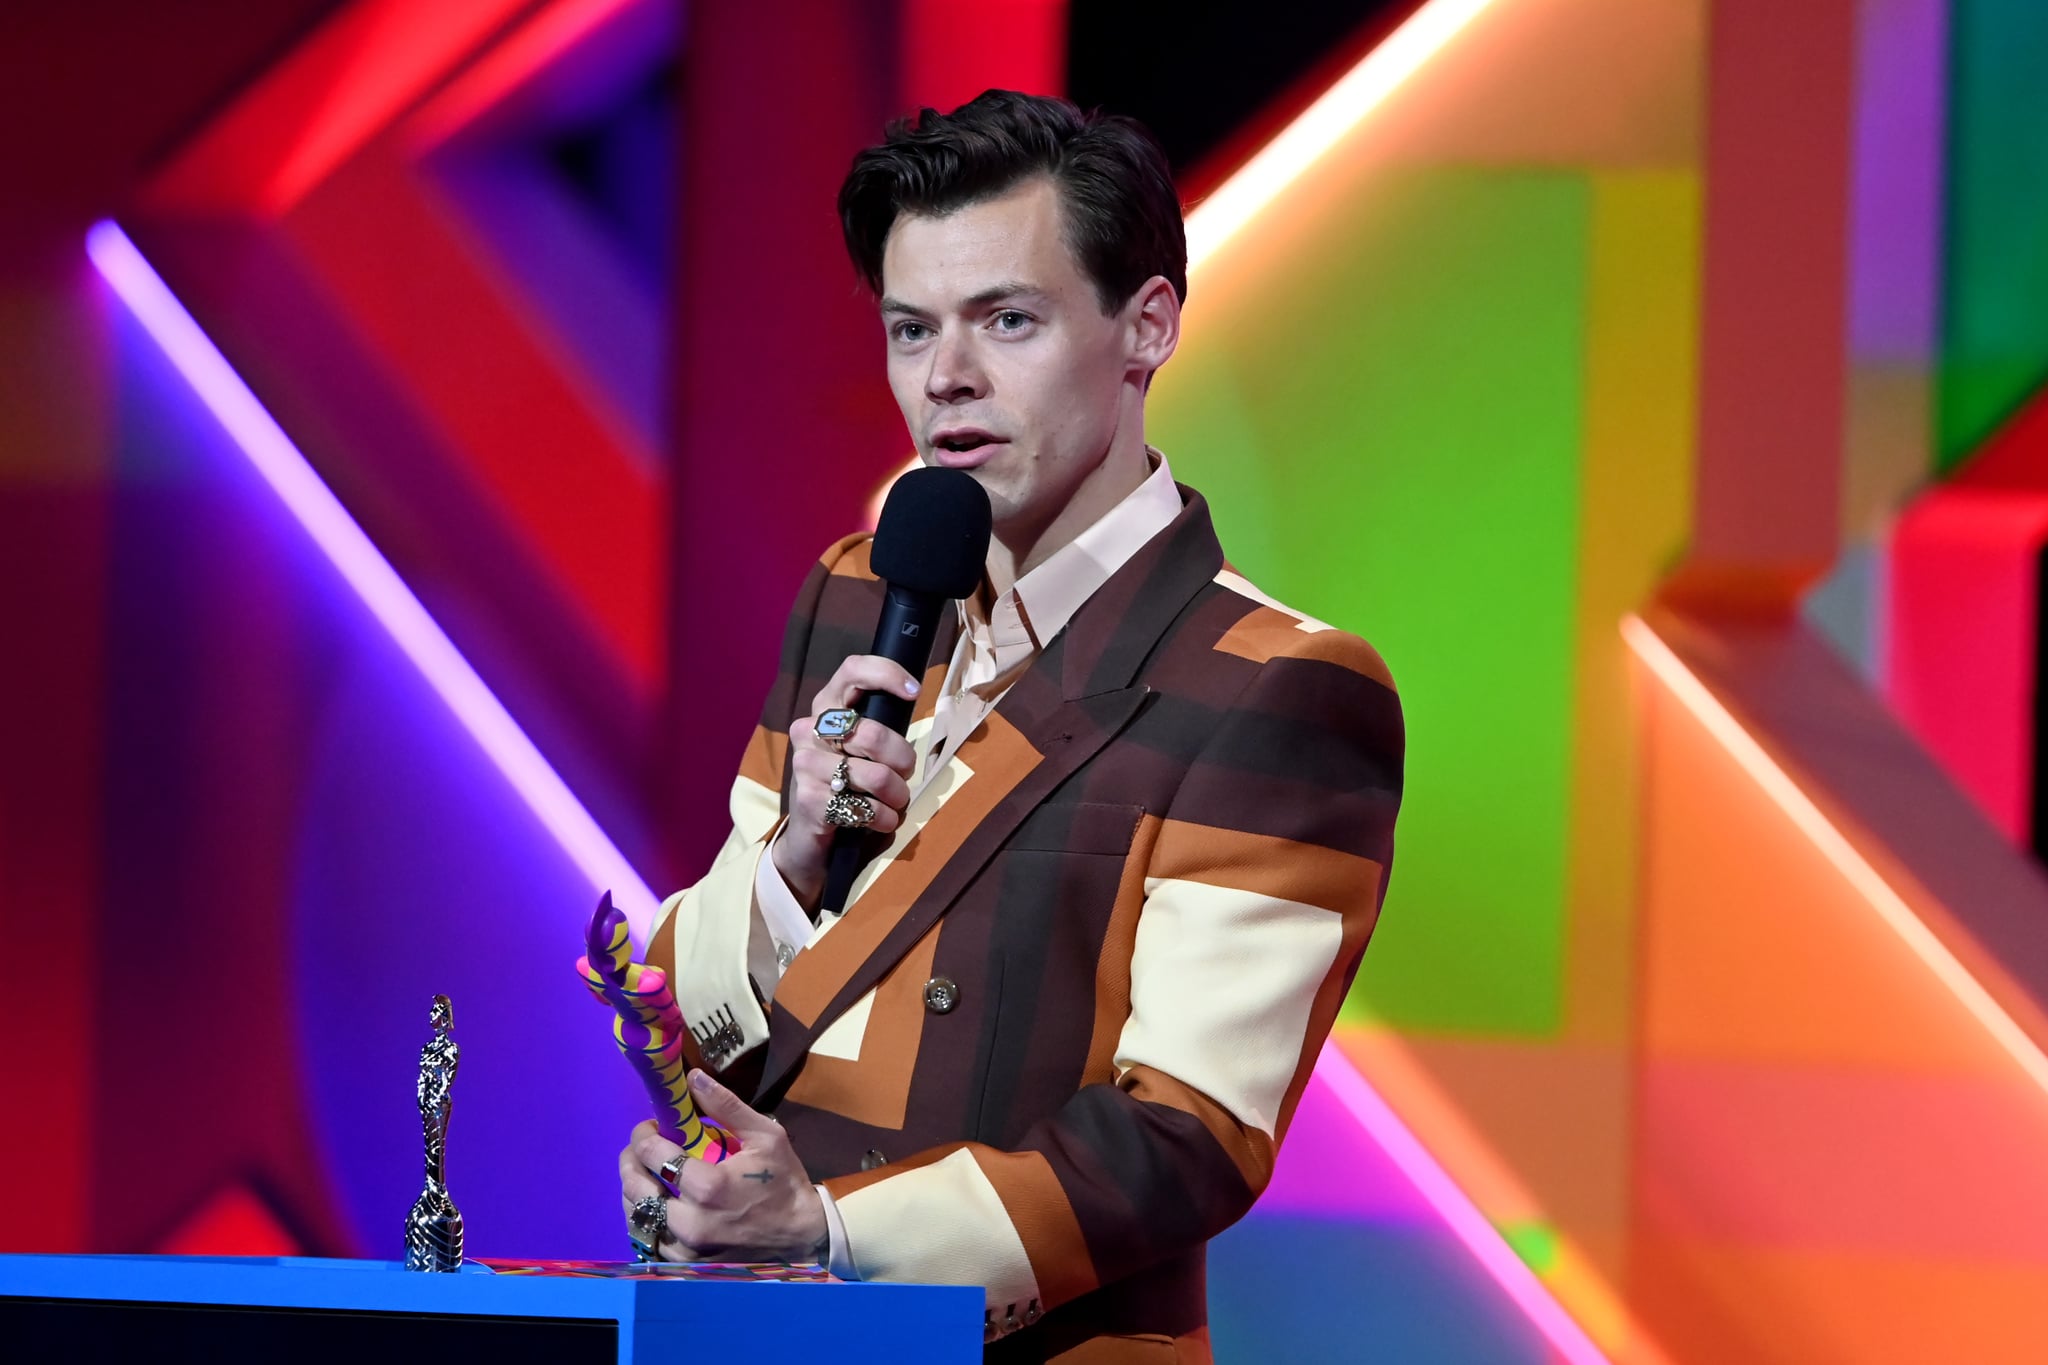 LONDON, ENGLAND - MAY 11: Harry Styles accepts his award for British Single during The BRIT Awards 2021 at The O2 Arena on May 11, 2021 in London, England. (Photo by Dave J Hogan/Getty Images)